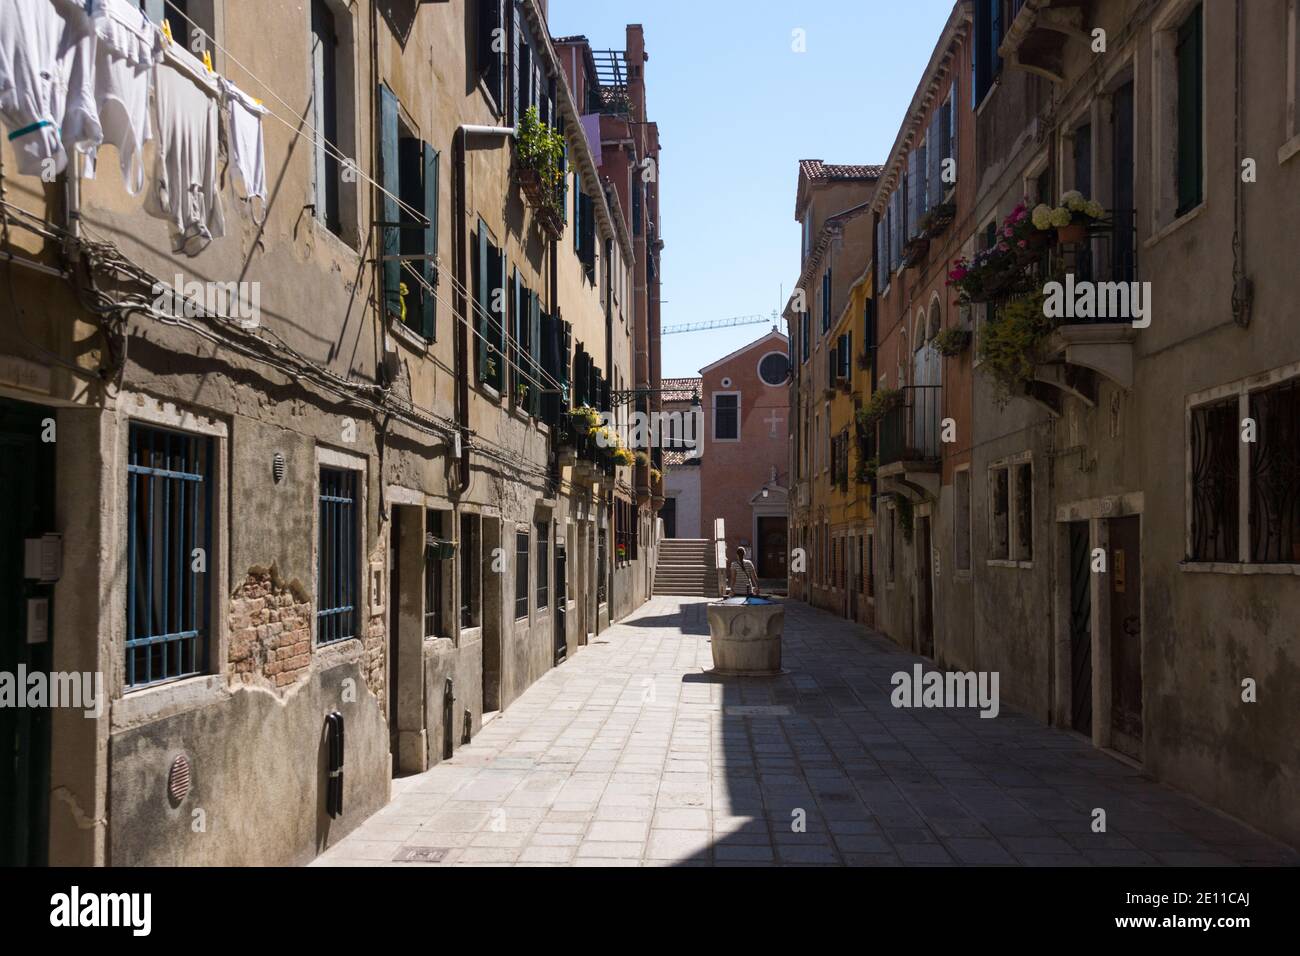 A lone tourist walking down the Ruga Vecchia - an example of how deserted side and back streets in Venice are when you're off the beaten path. Italy Stock Photo